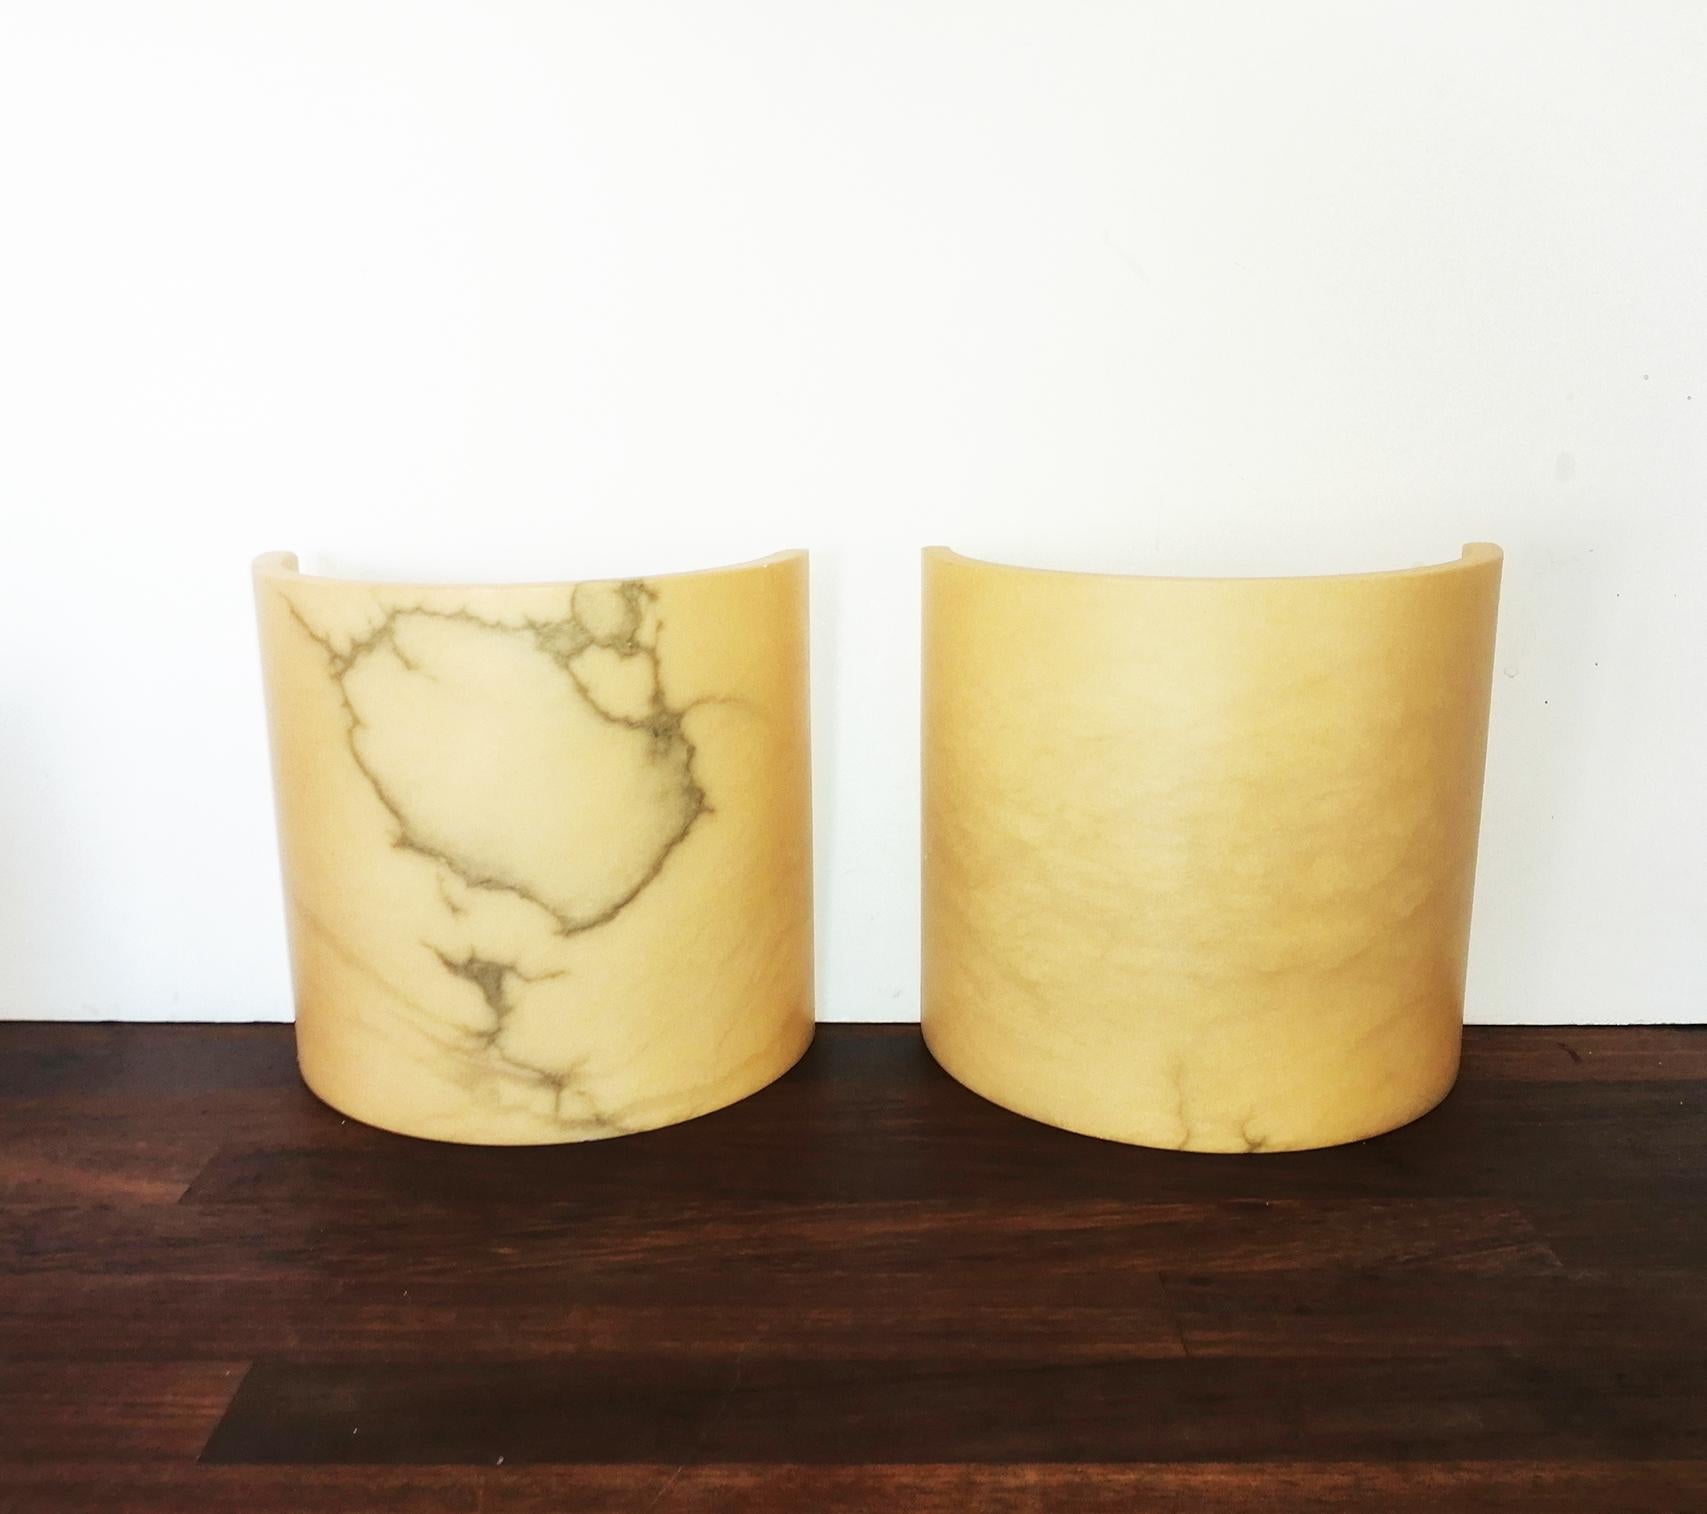  Pair of alabaster wall sconces,  with half cylinder shape.

These alabaster sconces are in very good condition, like new

Minimalist, 